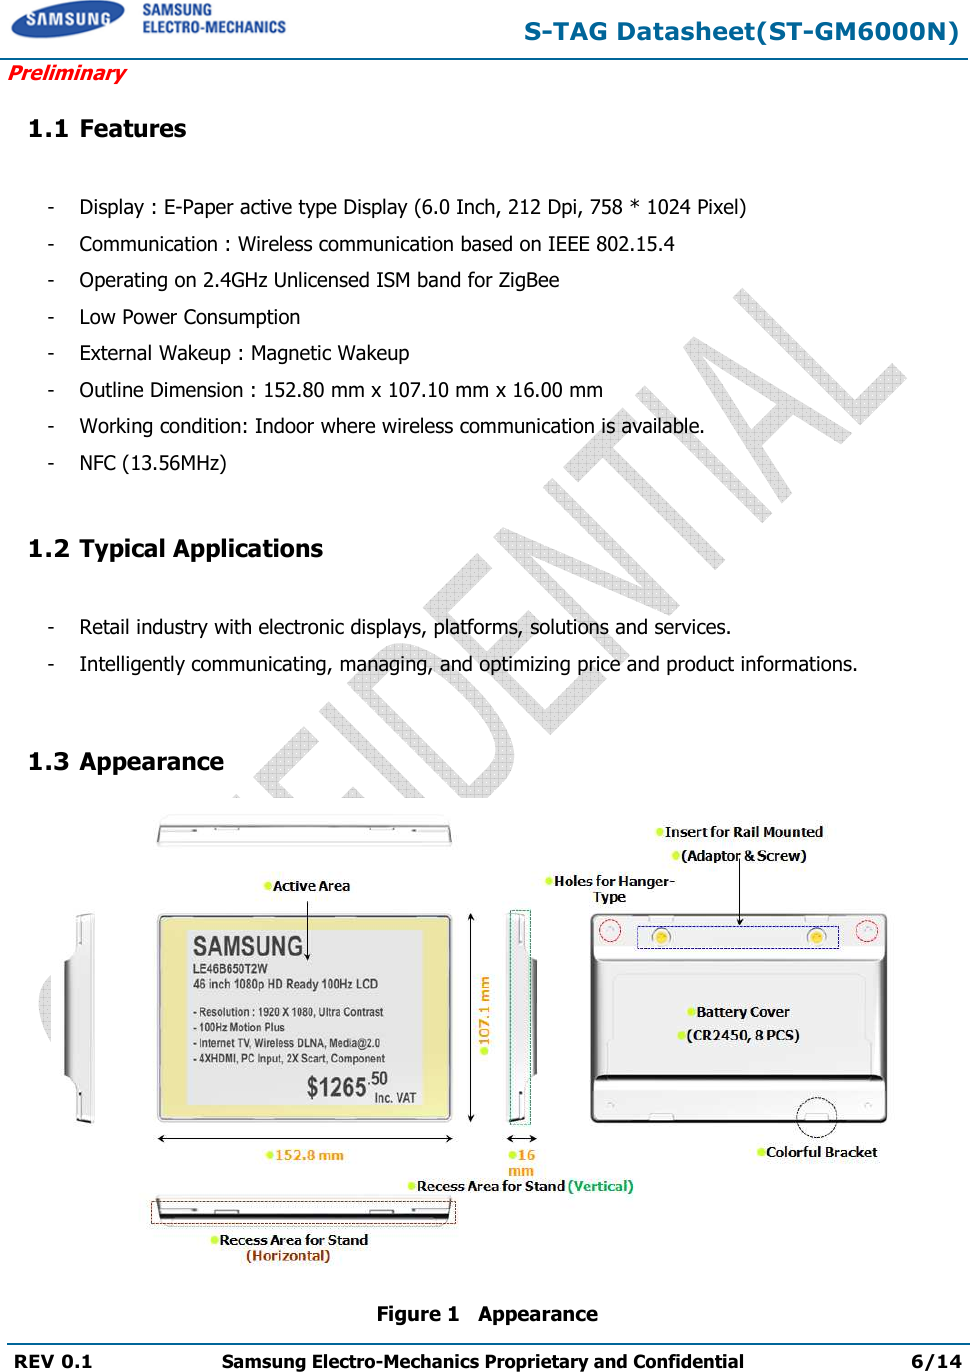  S-TAG Datasheet(ST-GM6000N) Preliminary REV 0.1  Samsung Electro-Mechanics Proprietary and Confidential 6/14   1.1 Features  - Display : E-Paper active type Display (6.0 Inch, 212 Dpi, 758 * 1024 Pixel) - Communication : Wireless communication based on IEEE 802.15.4 - Operating on 2.4GHz Unlicensed ISM band for ZigBee - Low Power Consumption - External Wakeup : Magnetic Wakeup - Outline Dimension : 152.80 mm x 107.10 mm x 16.00 mm  - Working condition: Indoor where wireless communication is available. - NFC (13.56MHz)  1.2 Typical Applications  - Retail industry with electronic displays, platforms, solutions and services. - Intelligently communicating, managing, and optimizing price and product informations.  1.3 Appearance    Figure 1   Appearance 